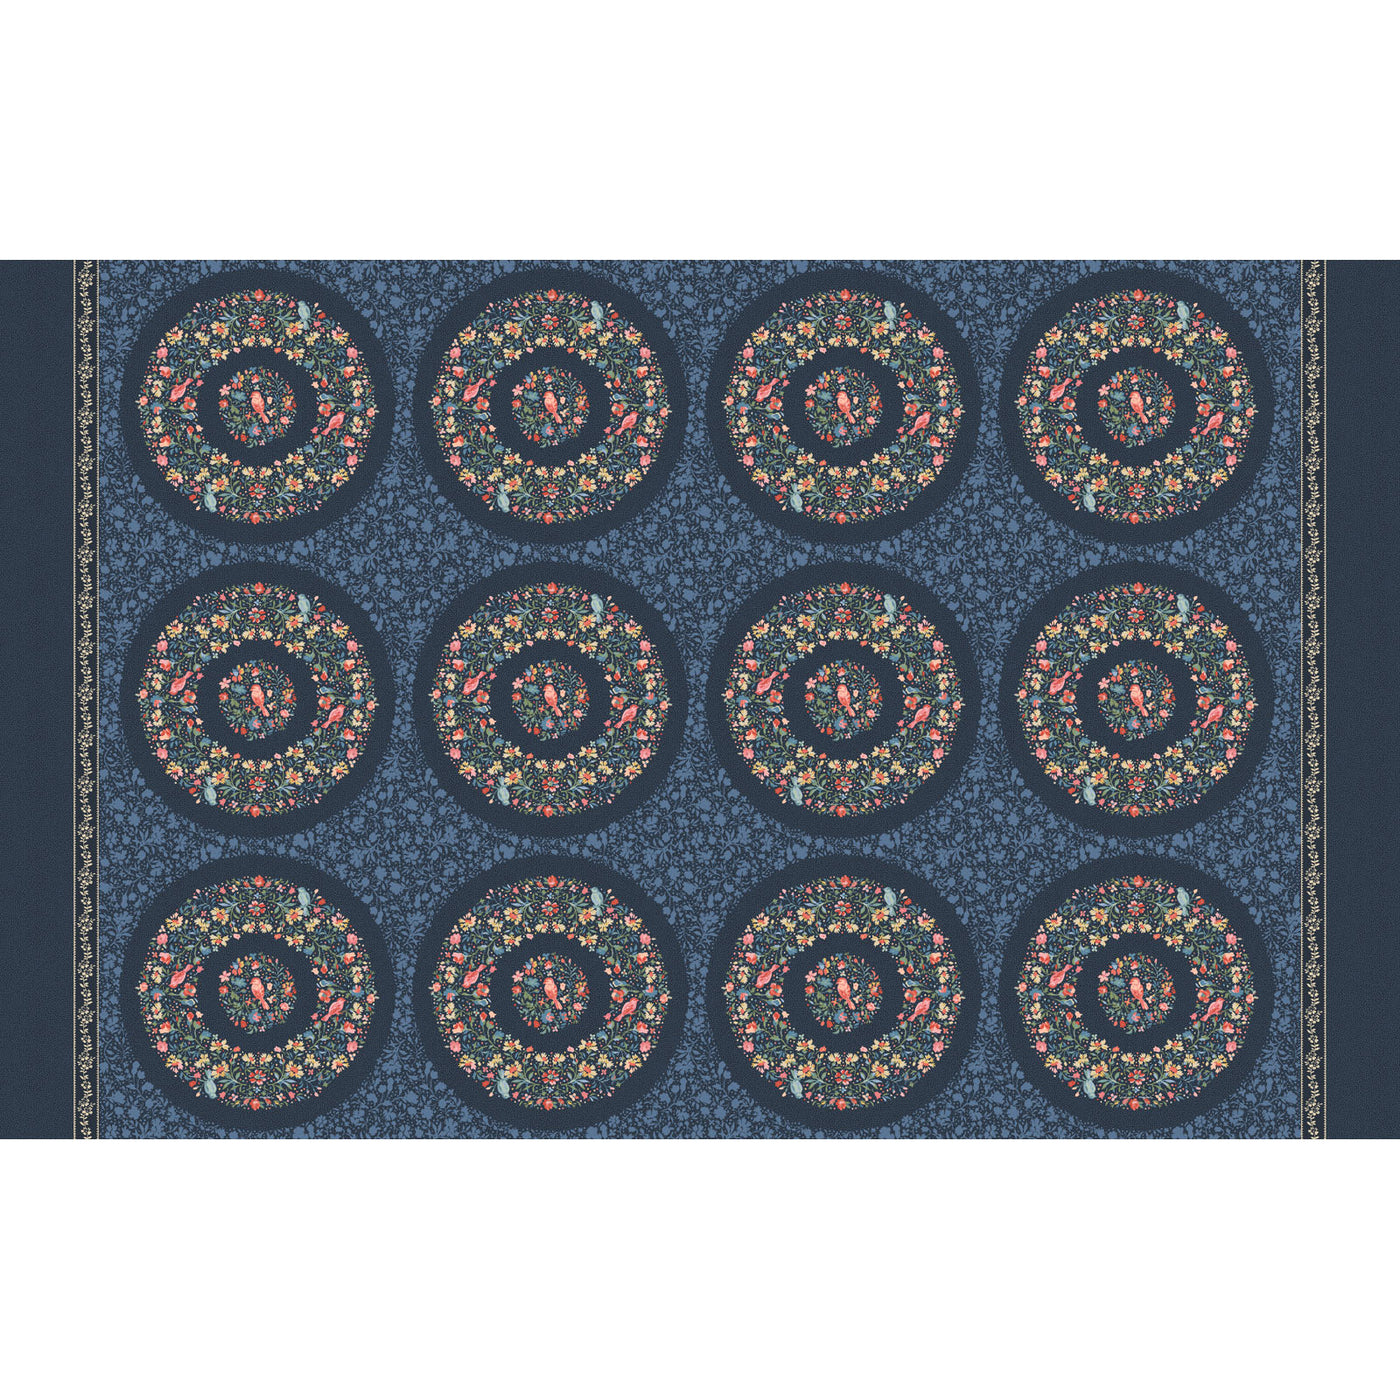 Lovely Bunch Wreaths Fabric Panel Navy